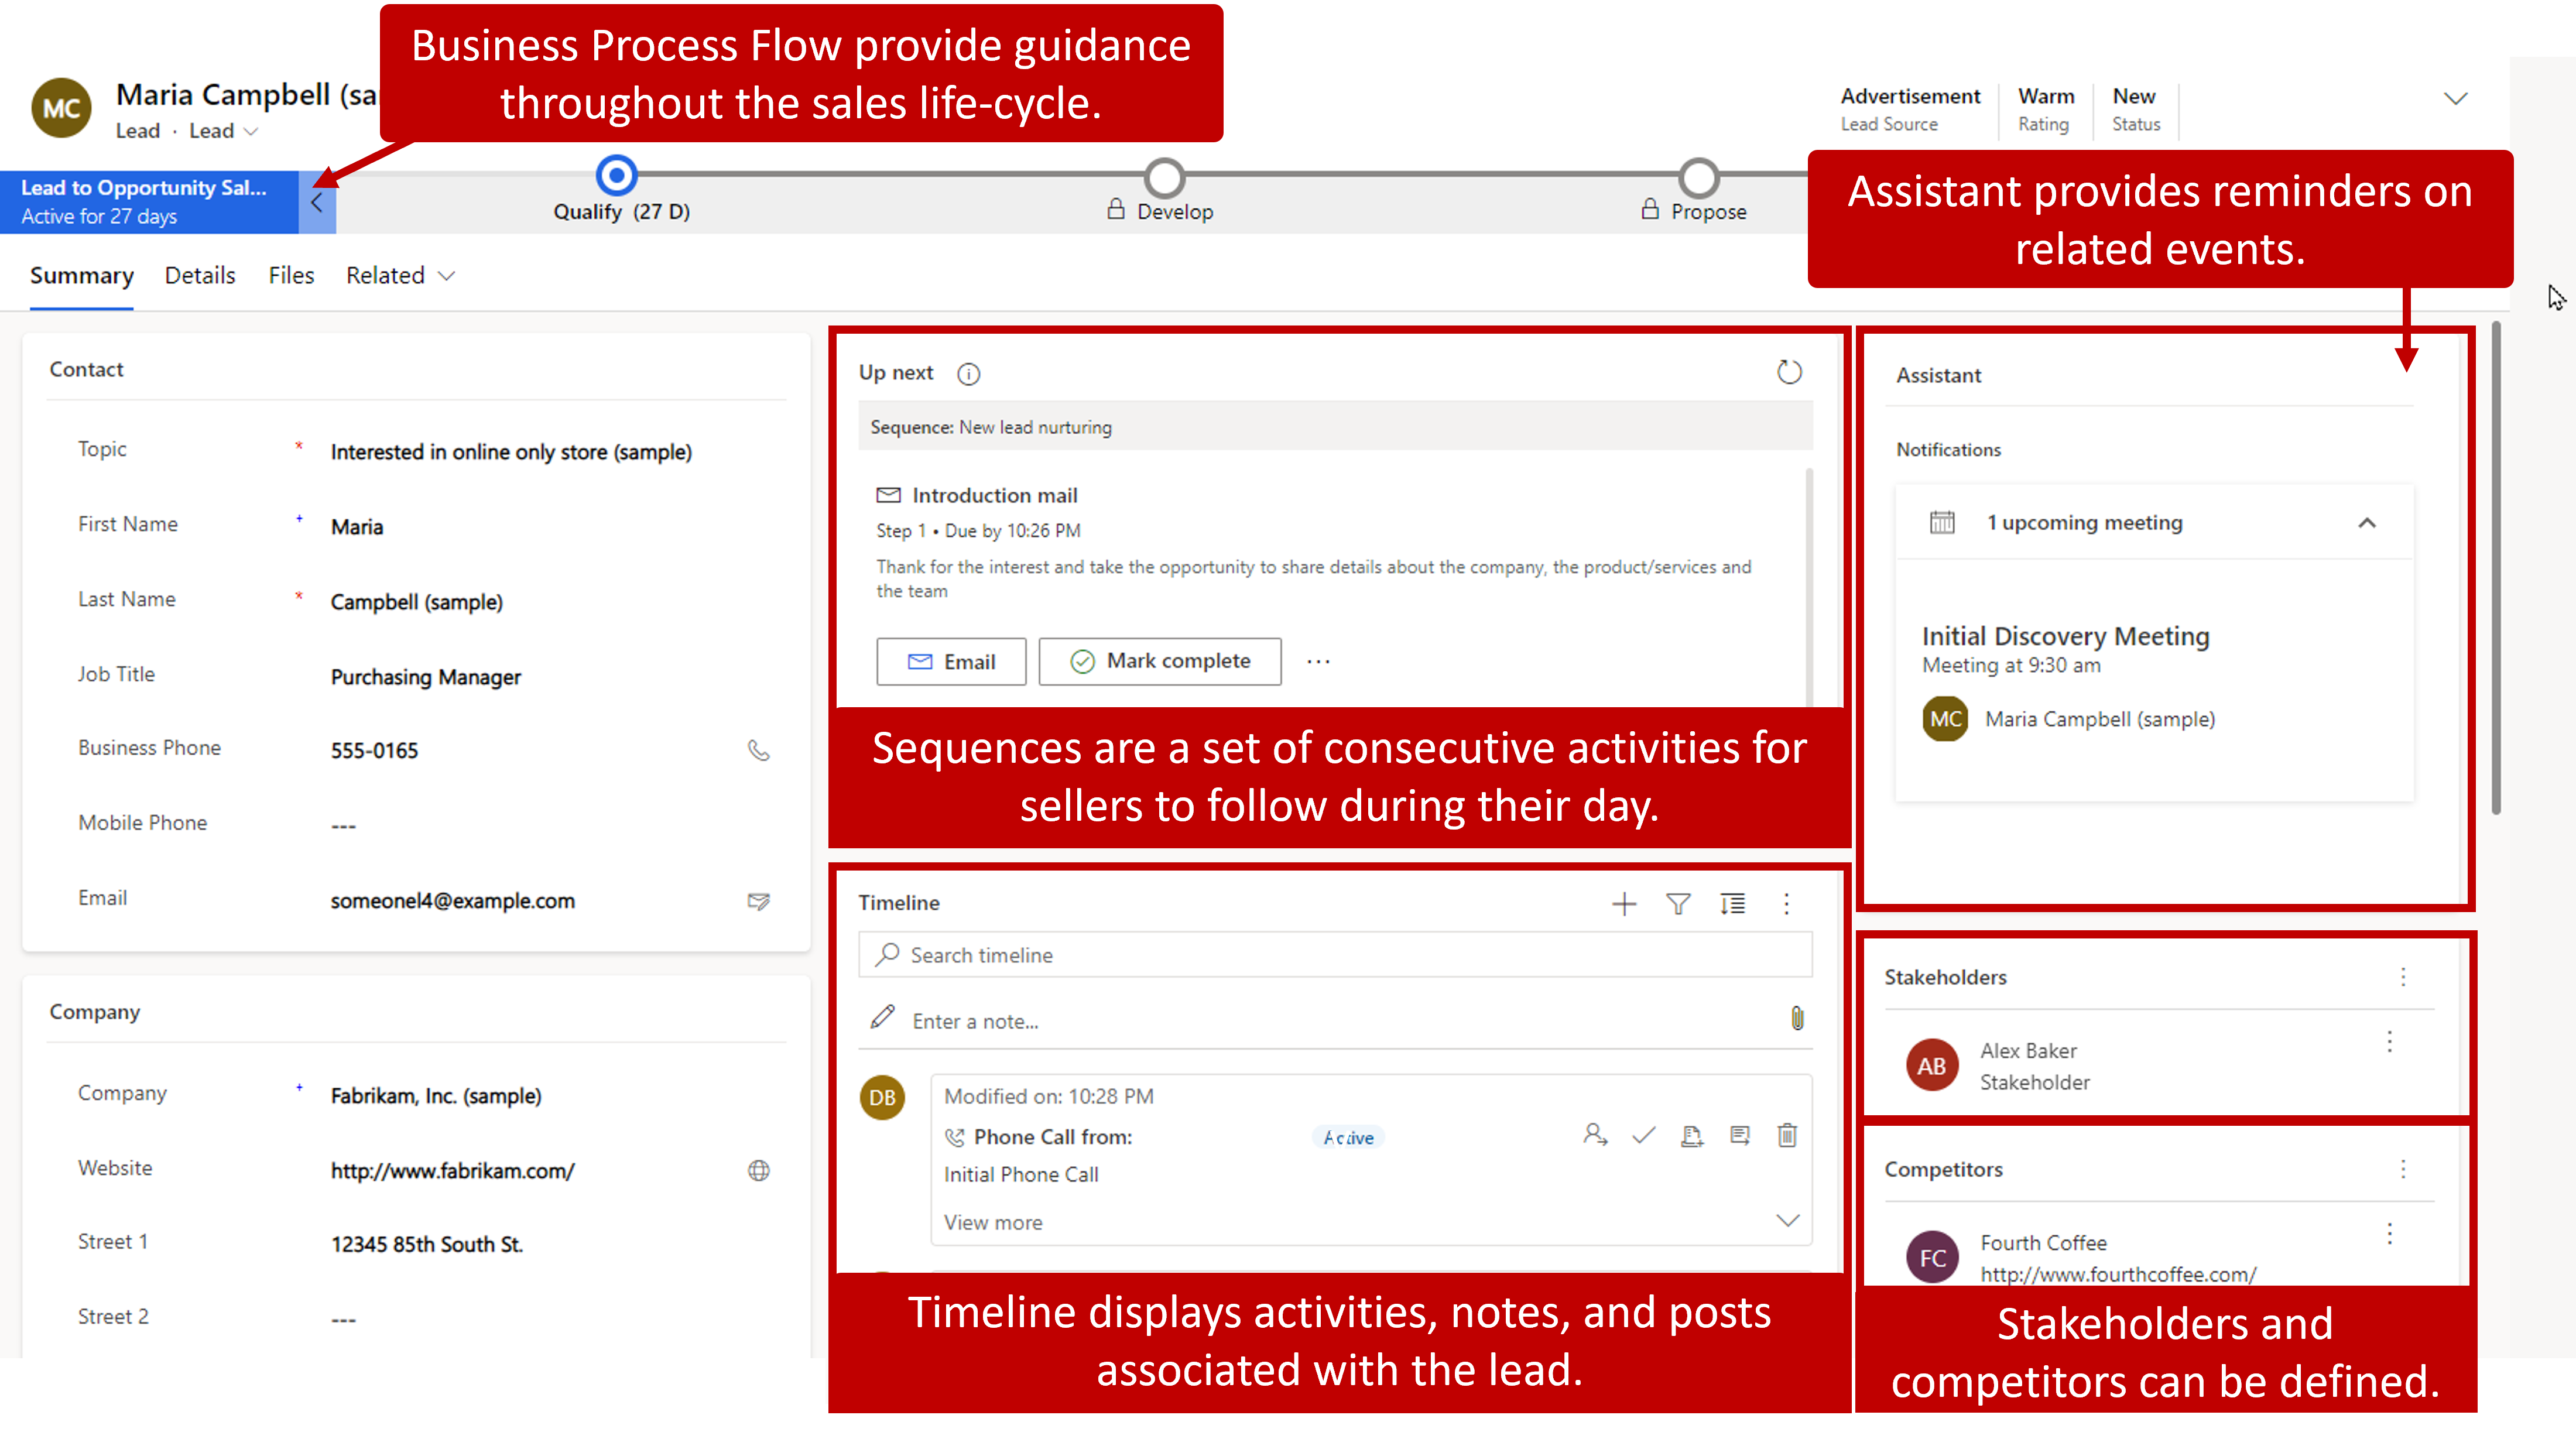 Business Process Flow guides users through the sales life-cycle with reminders, timeline of activities, notes, posts, stakeholders, and competitors.